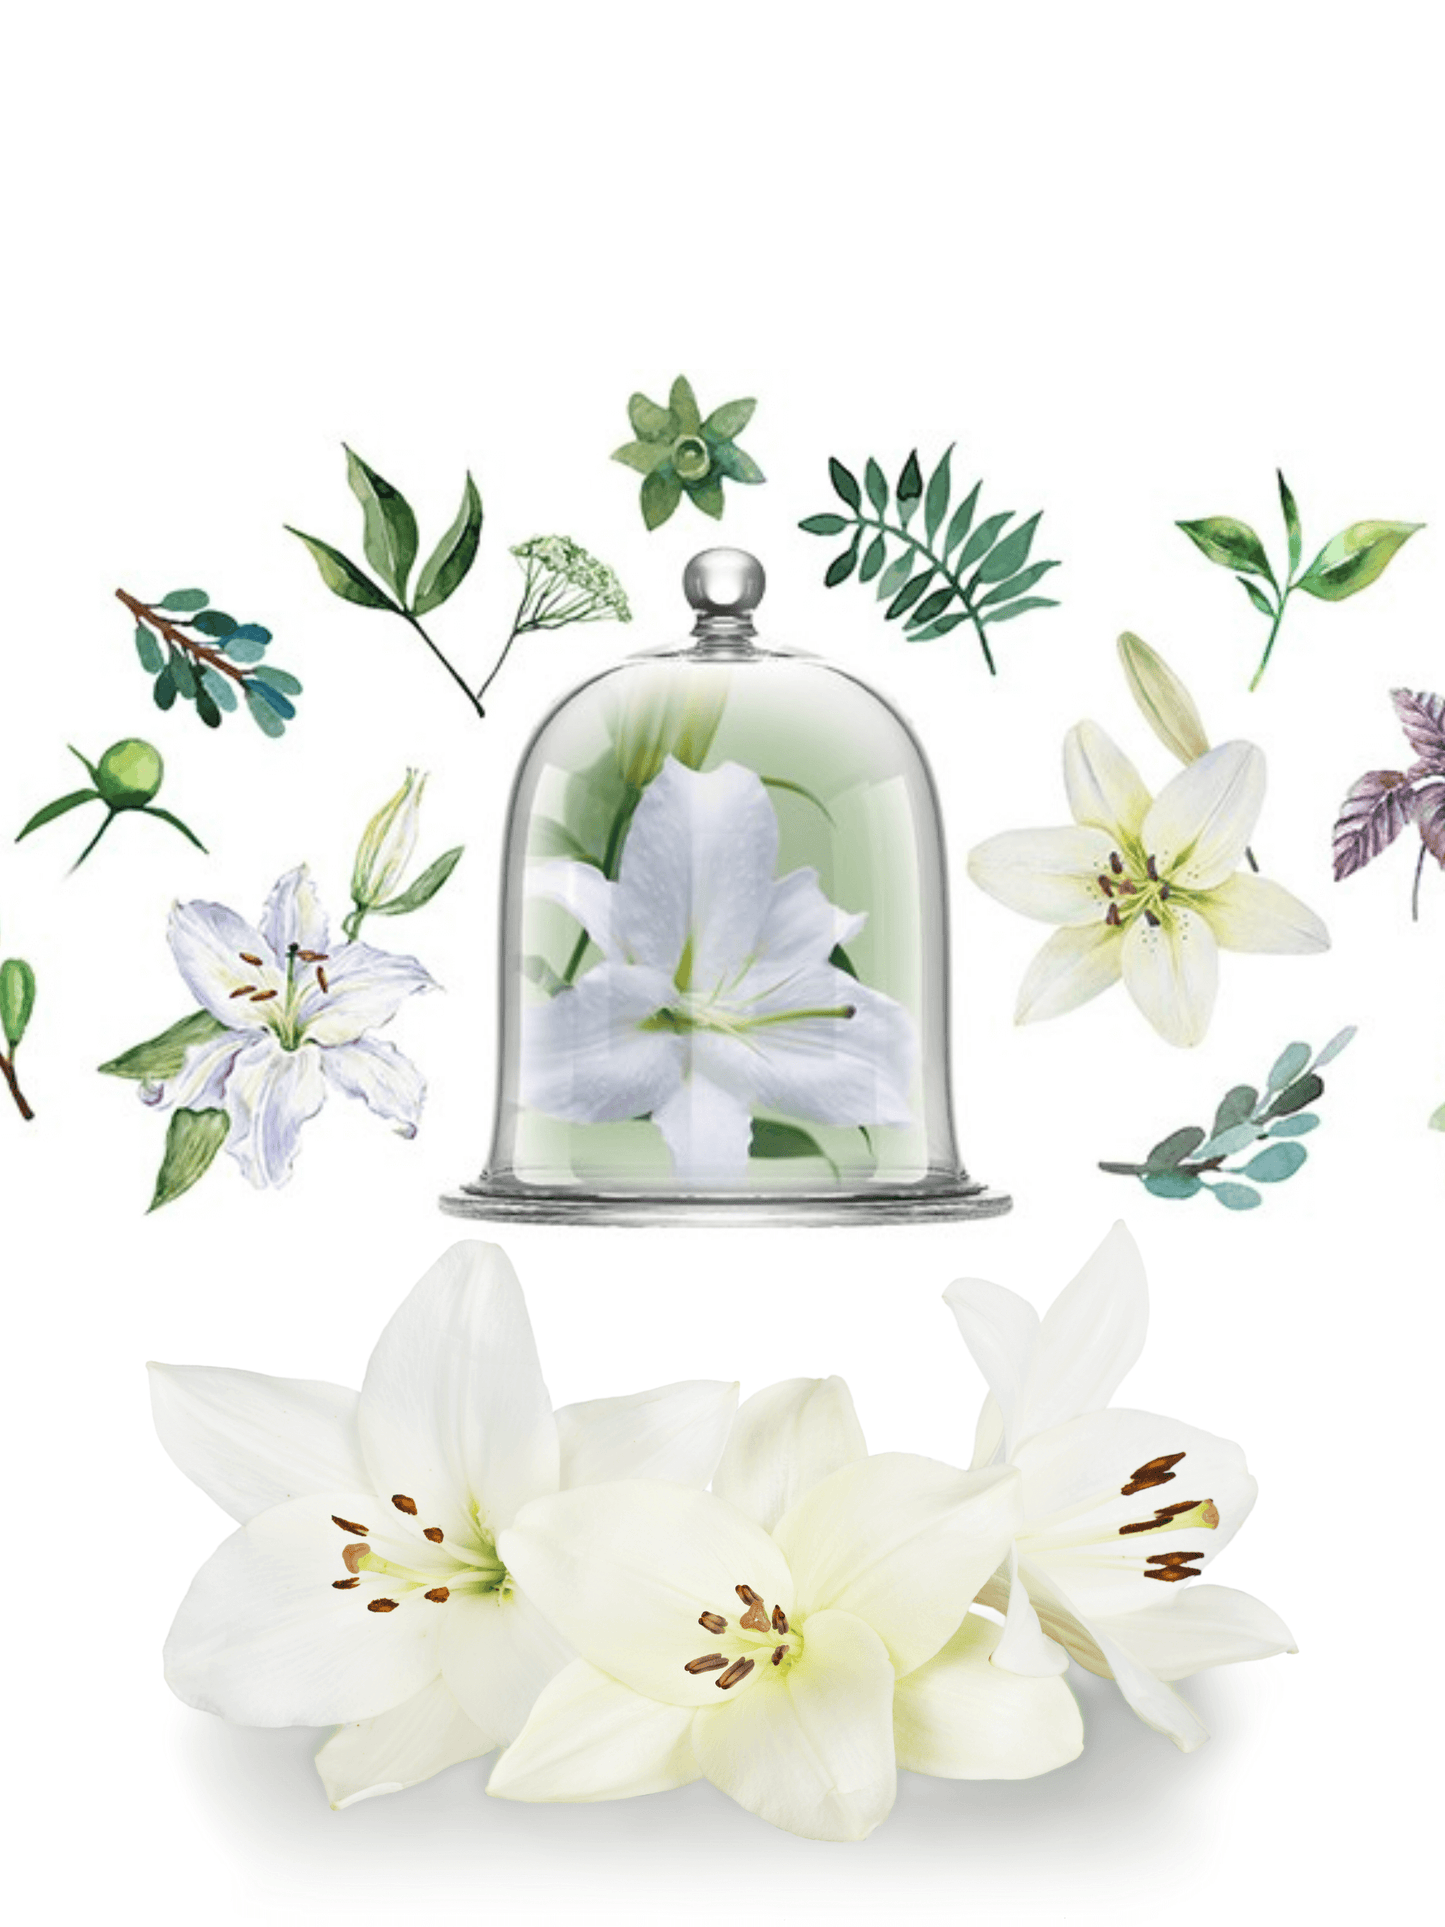 Porcelain Diffuser Fresh Lily Fragrance by Chando 100ml White/Green